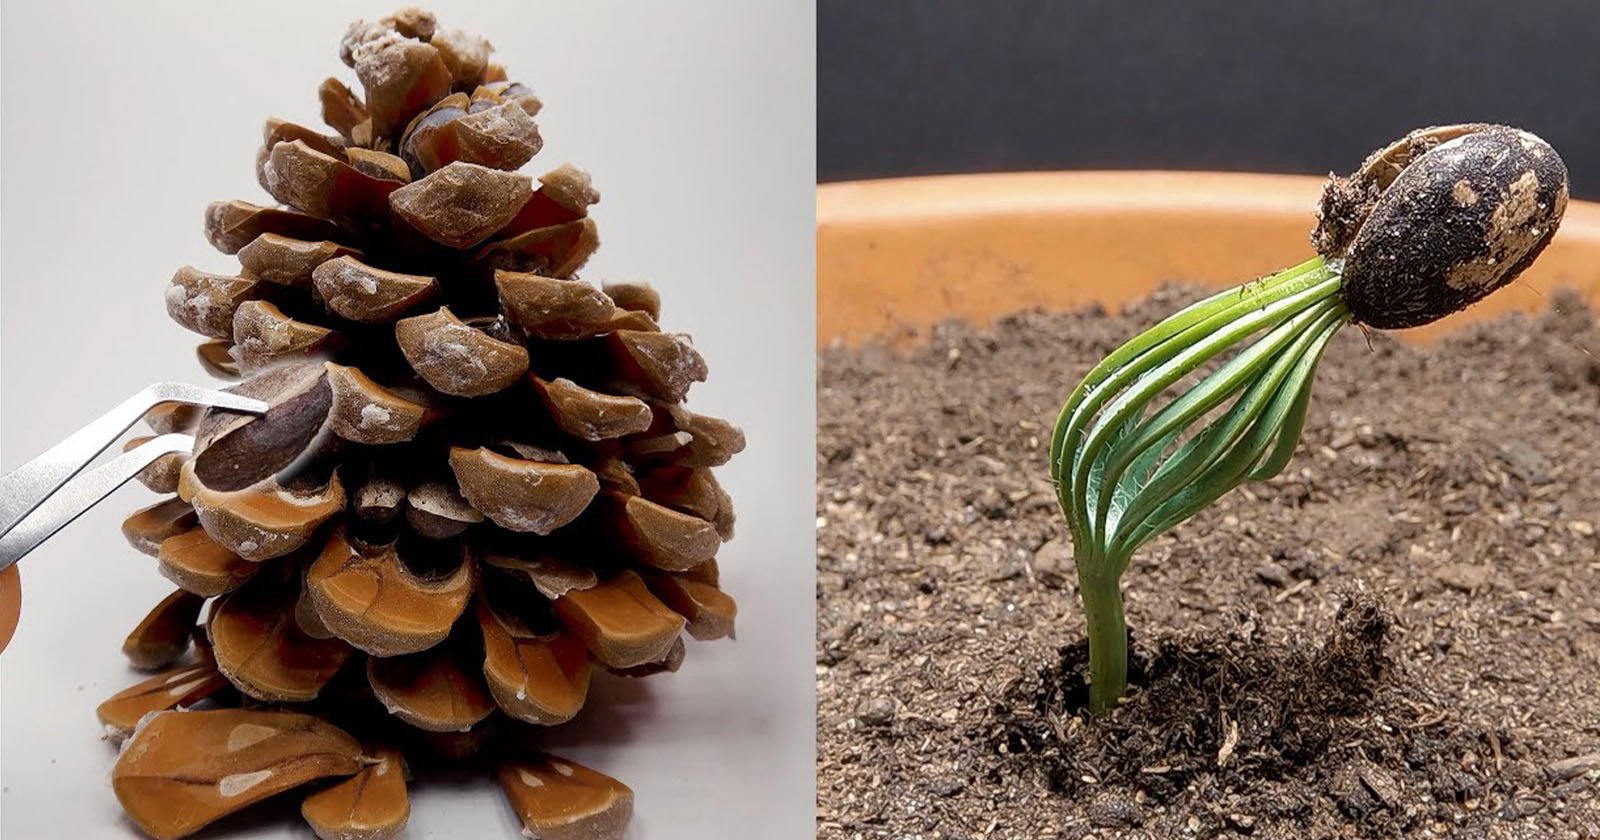 Fascinating 300-Day Timelapse of Pine Cone Growing Into a Pine Tree